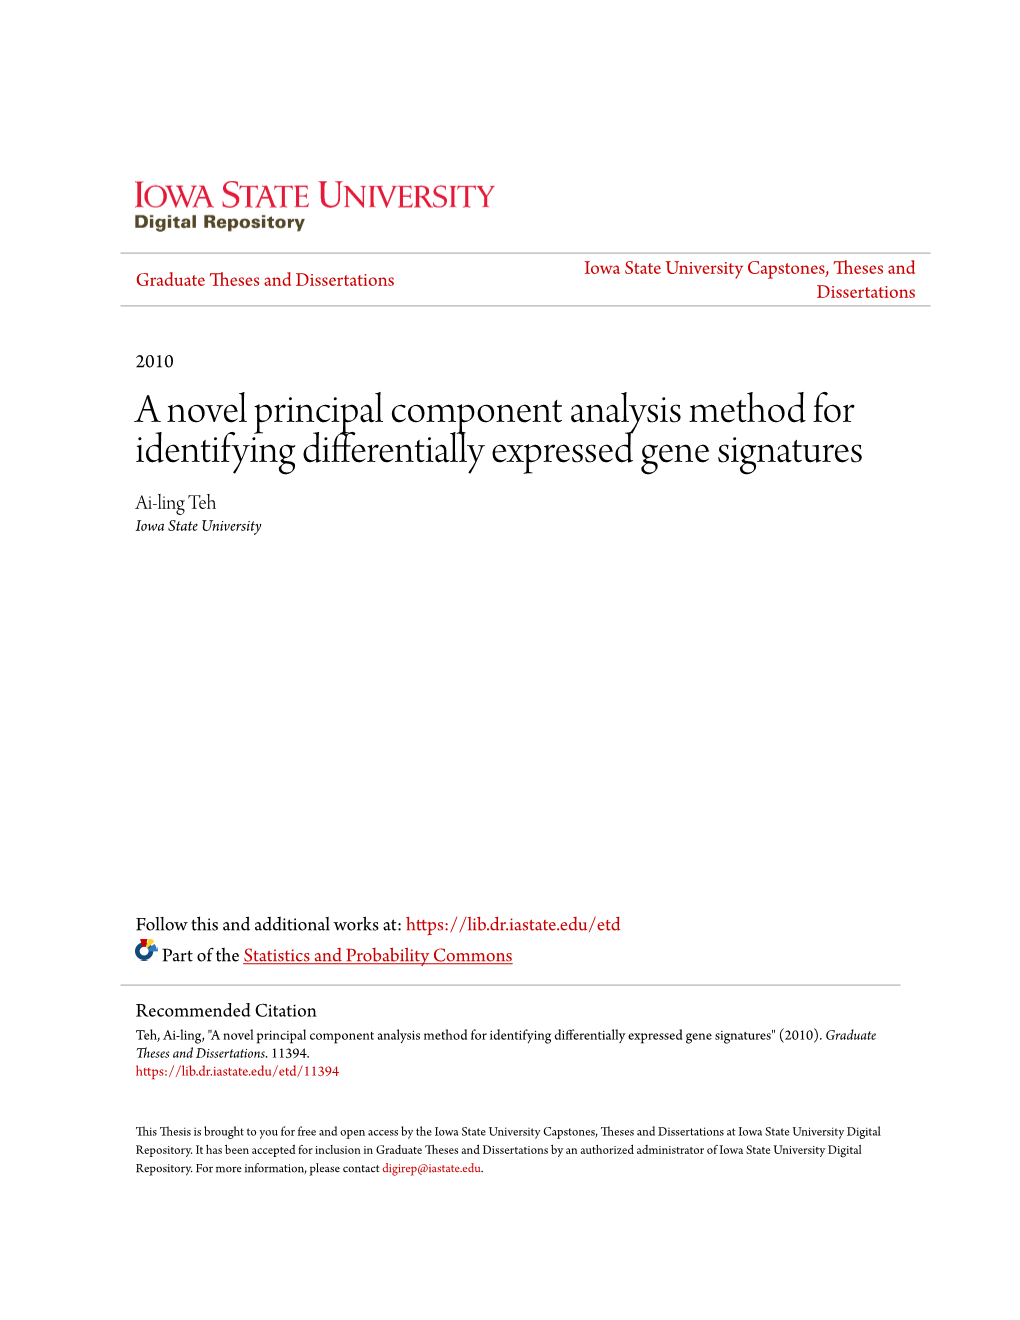 A Novel Principal Component Analysis Method for Identifying Differentially Expressed Gene Signatures Ai-Ling Teh Iowa State University